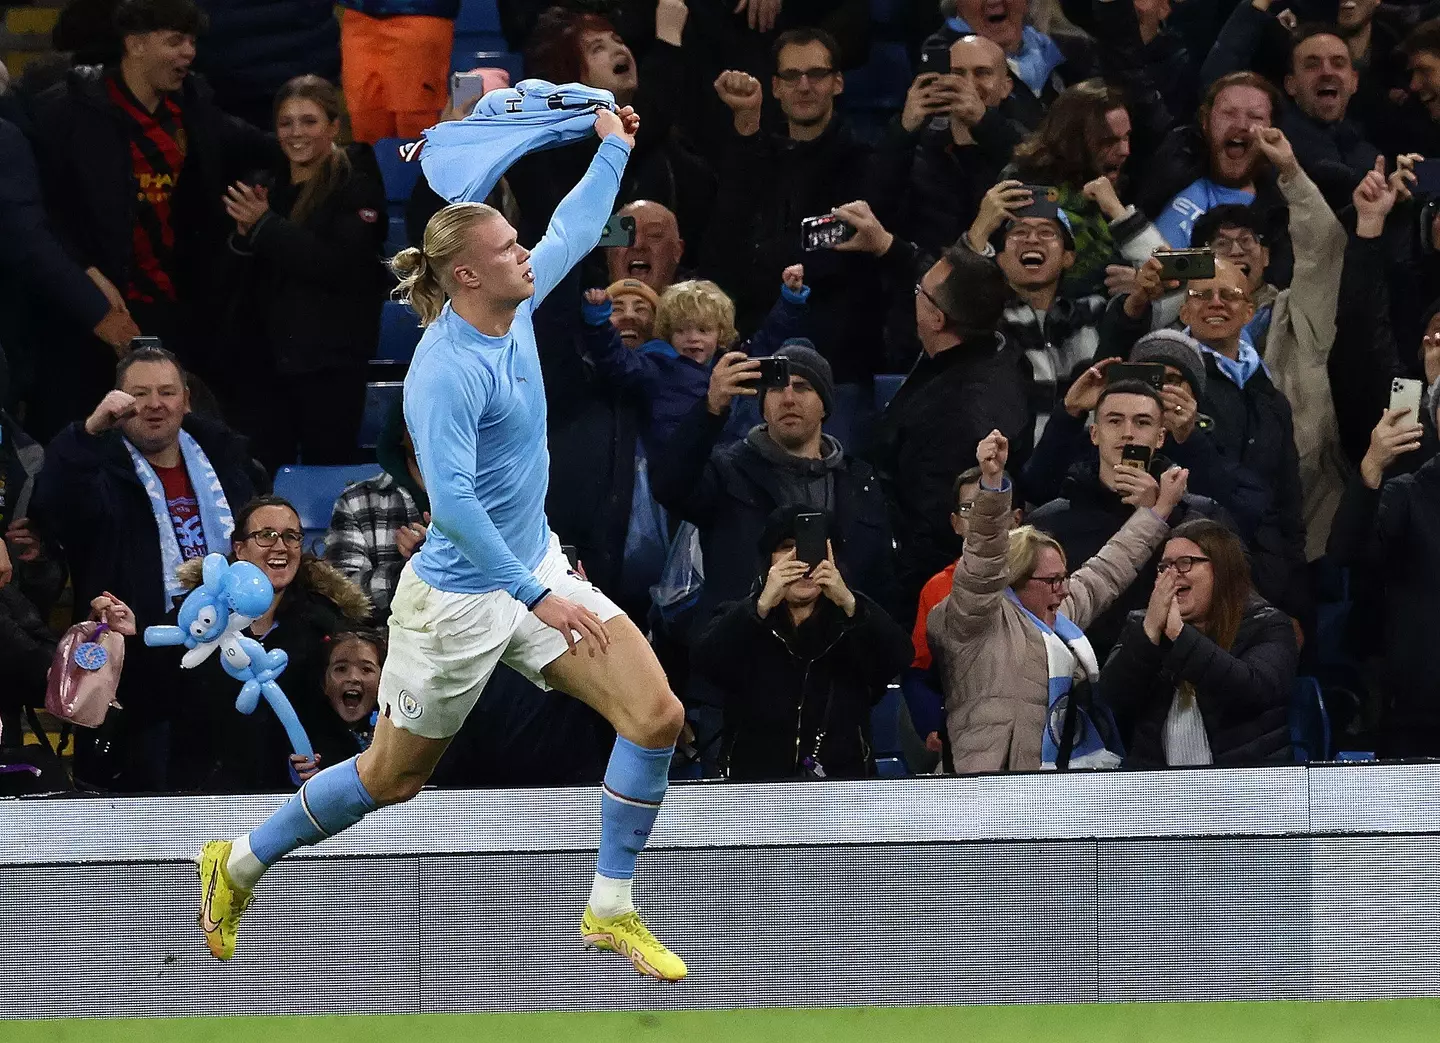 Erling Haaland of Manchester City celebrates scoring the winning goal during the Premier League match at the Etihad Stadium. (Alamy)